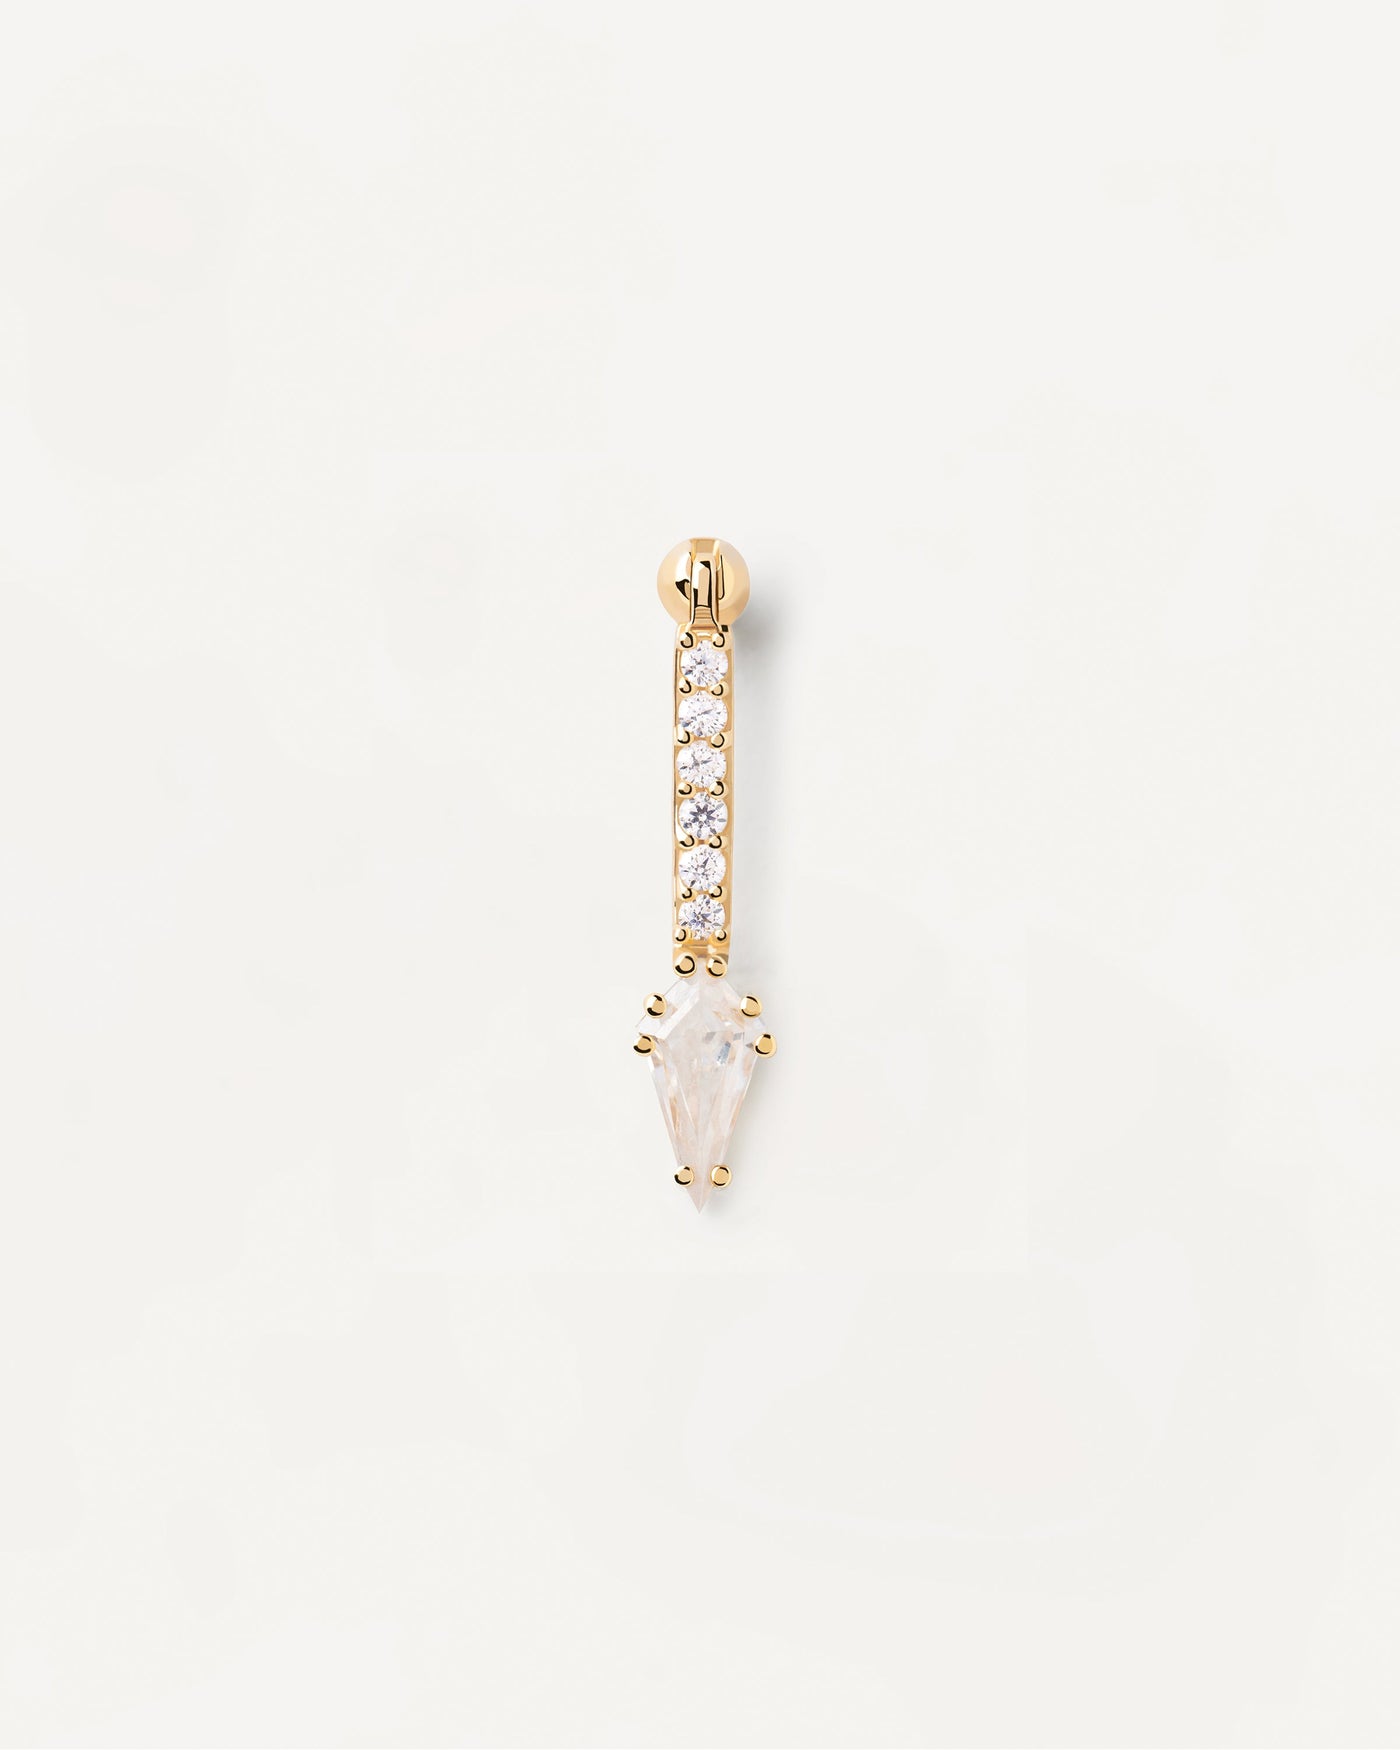 2023 Selection | Super Vero Single Earring. Gold-plated ear piercing with dainty zirconia and big crystal drop. Get the latest arrival from PDPAOLA. Place your order safely and get this Best Seller. Free Shipping.